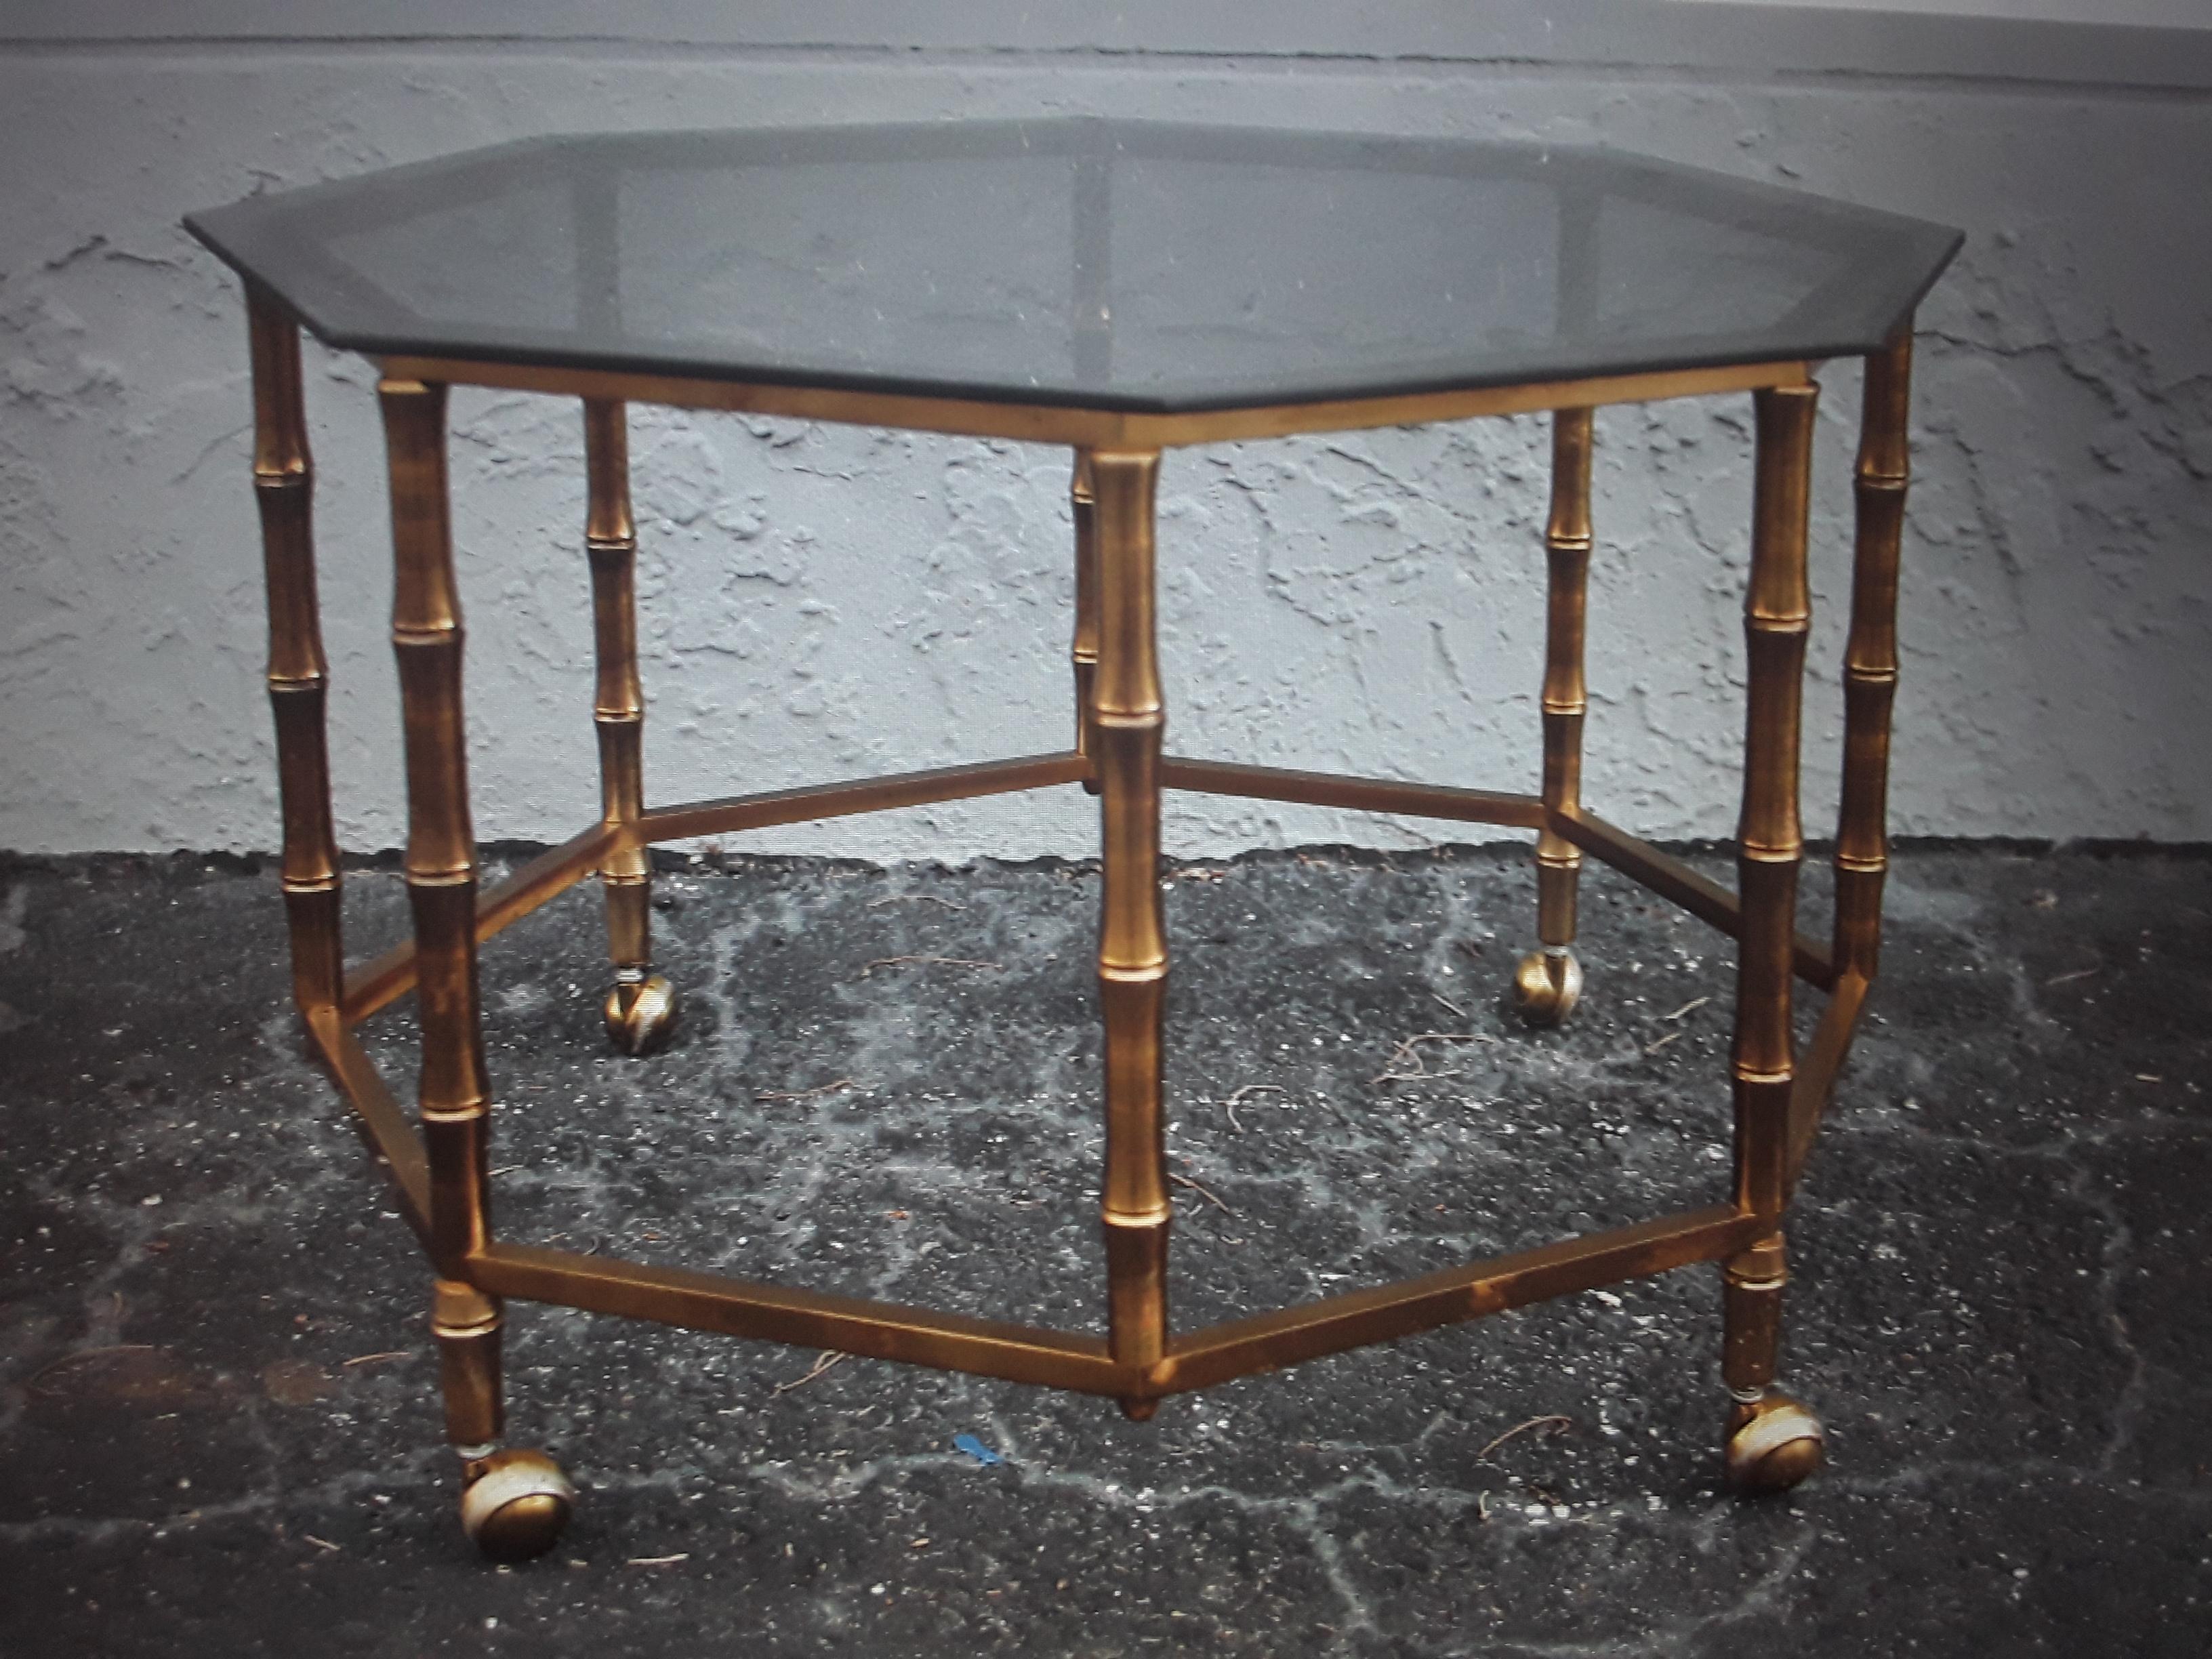 1950s Mid Century Modern Faux Bamboo GiltMetal Coffee/Coctail Table Smoked Glass In Good Condition For Sale In Opa Locka, FL